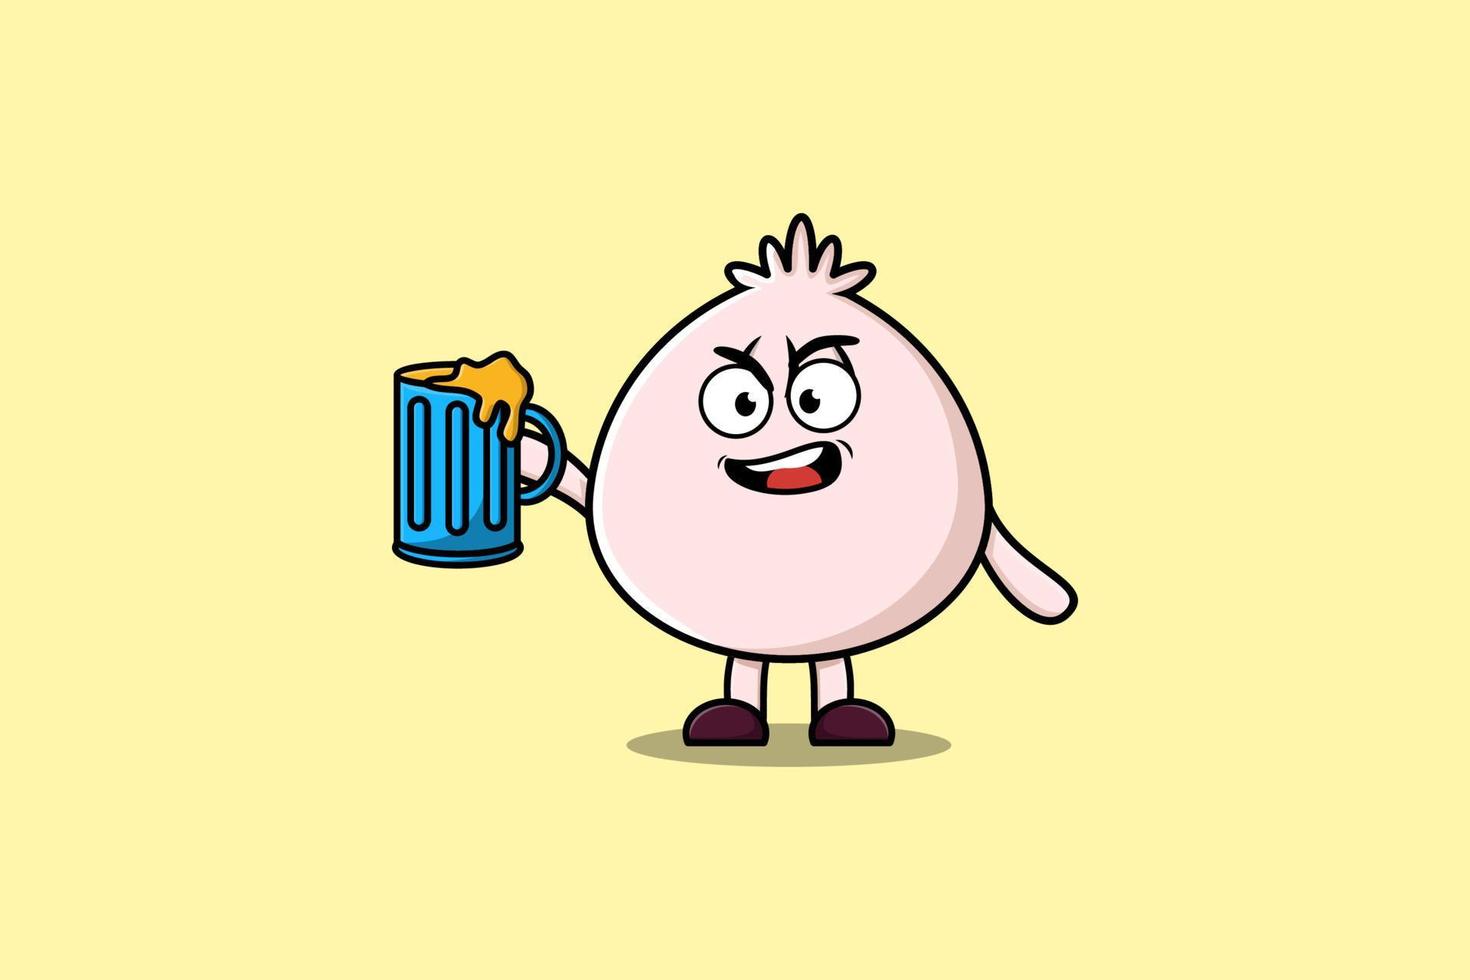 Cute Dim sum cartoon character with beer glass vector